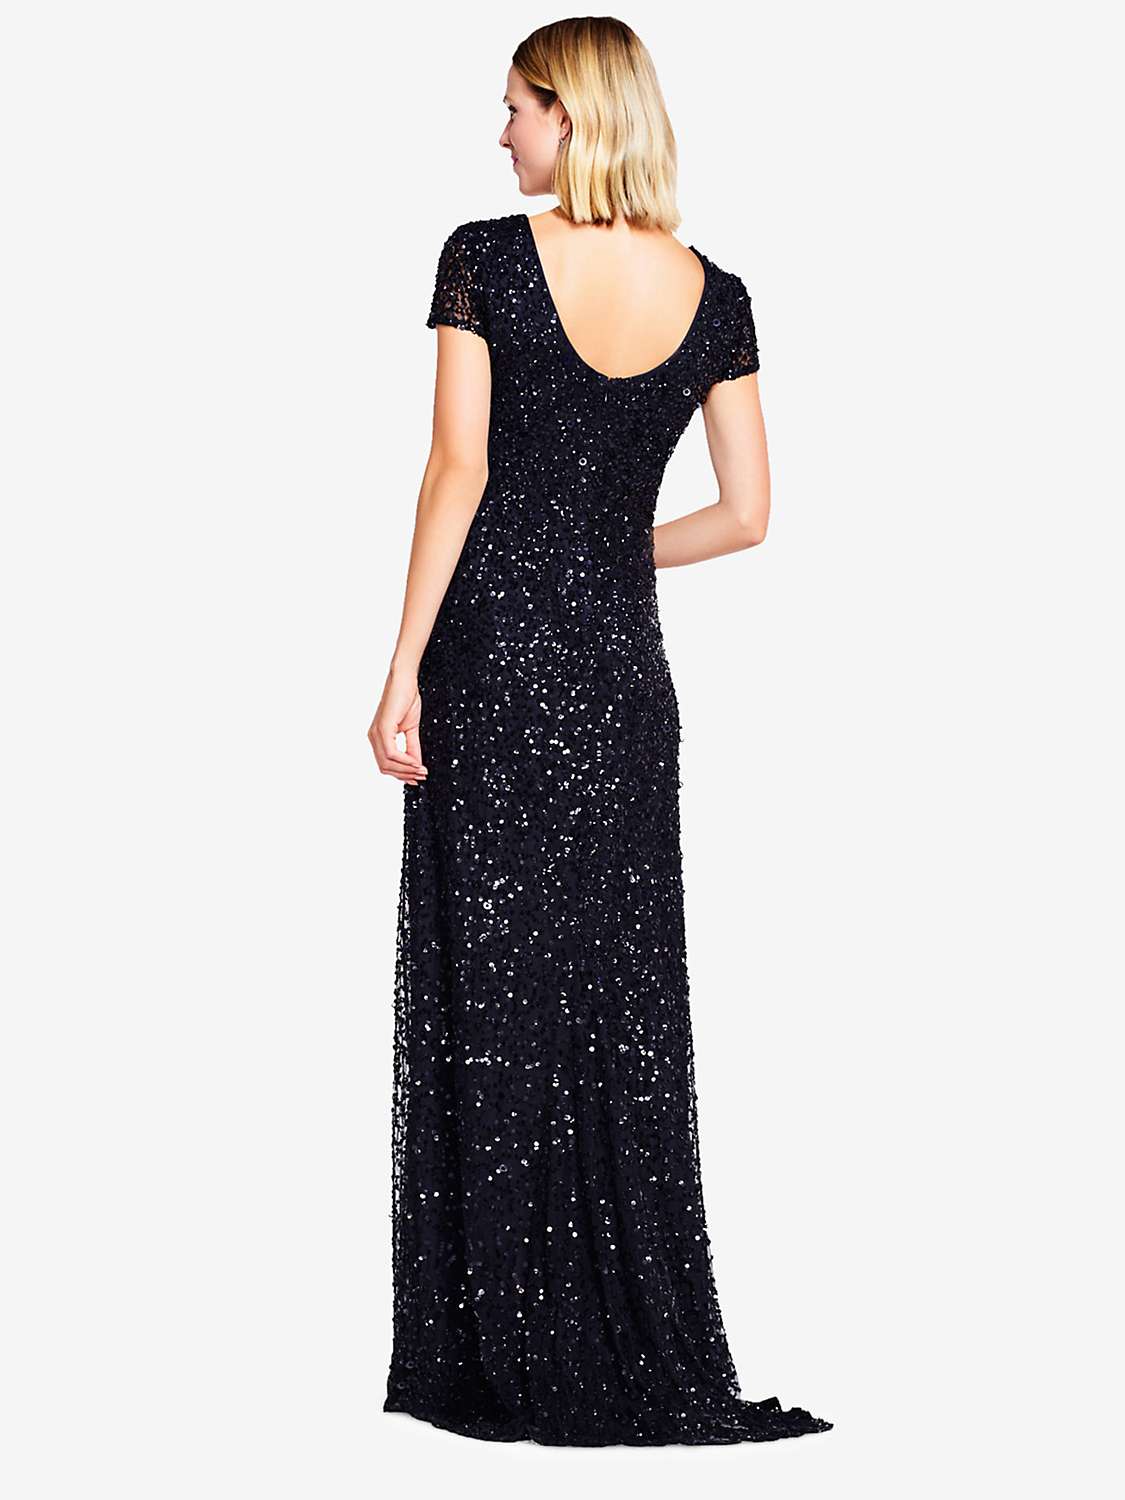 Buy Adrianna Papell Scoop Back Sequin Maxi Dress, Black Online at johnlewis.com